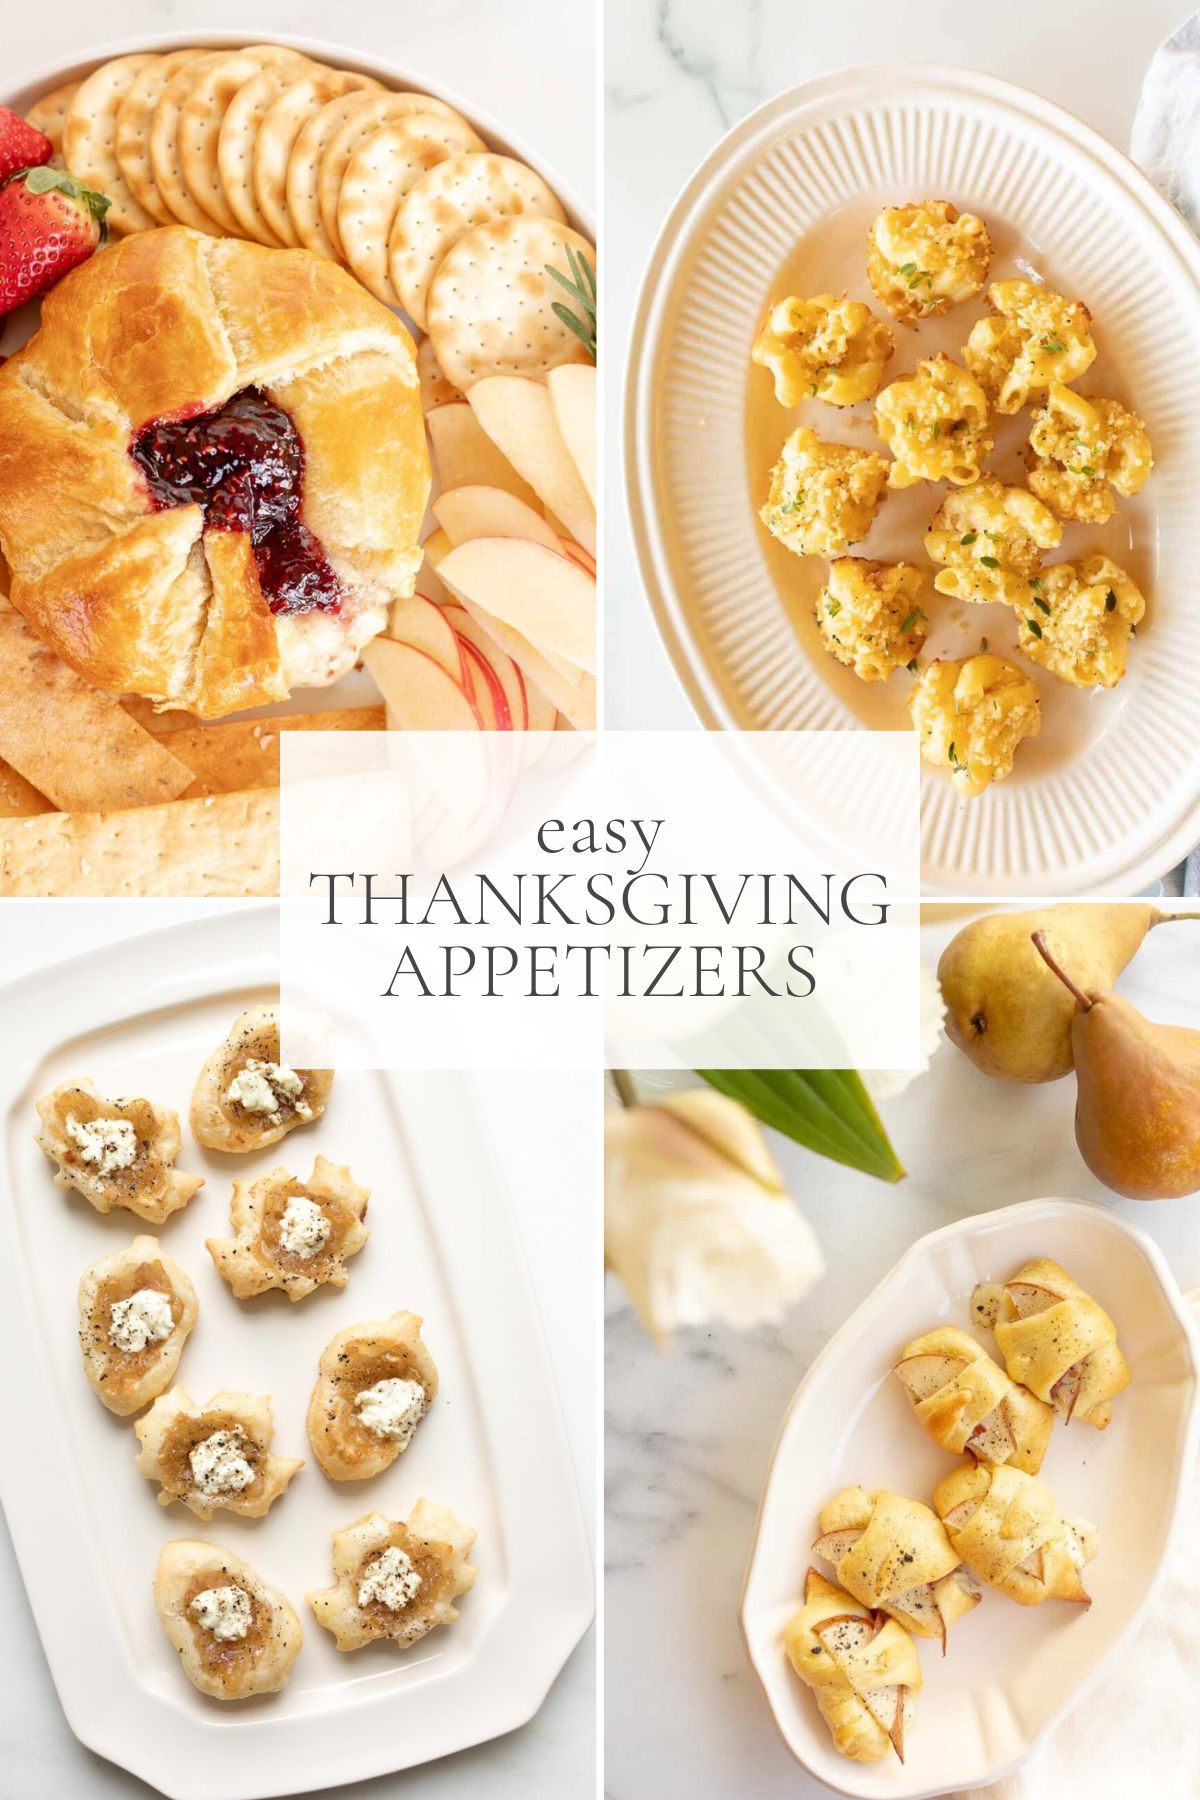 A graphic image featuring a variety of Thanksgiving appetizers.